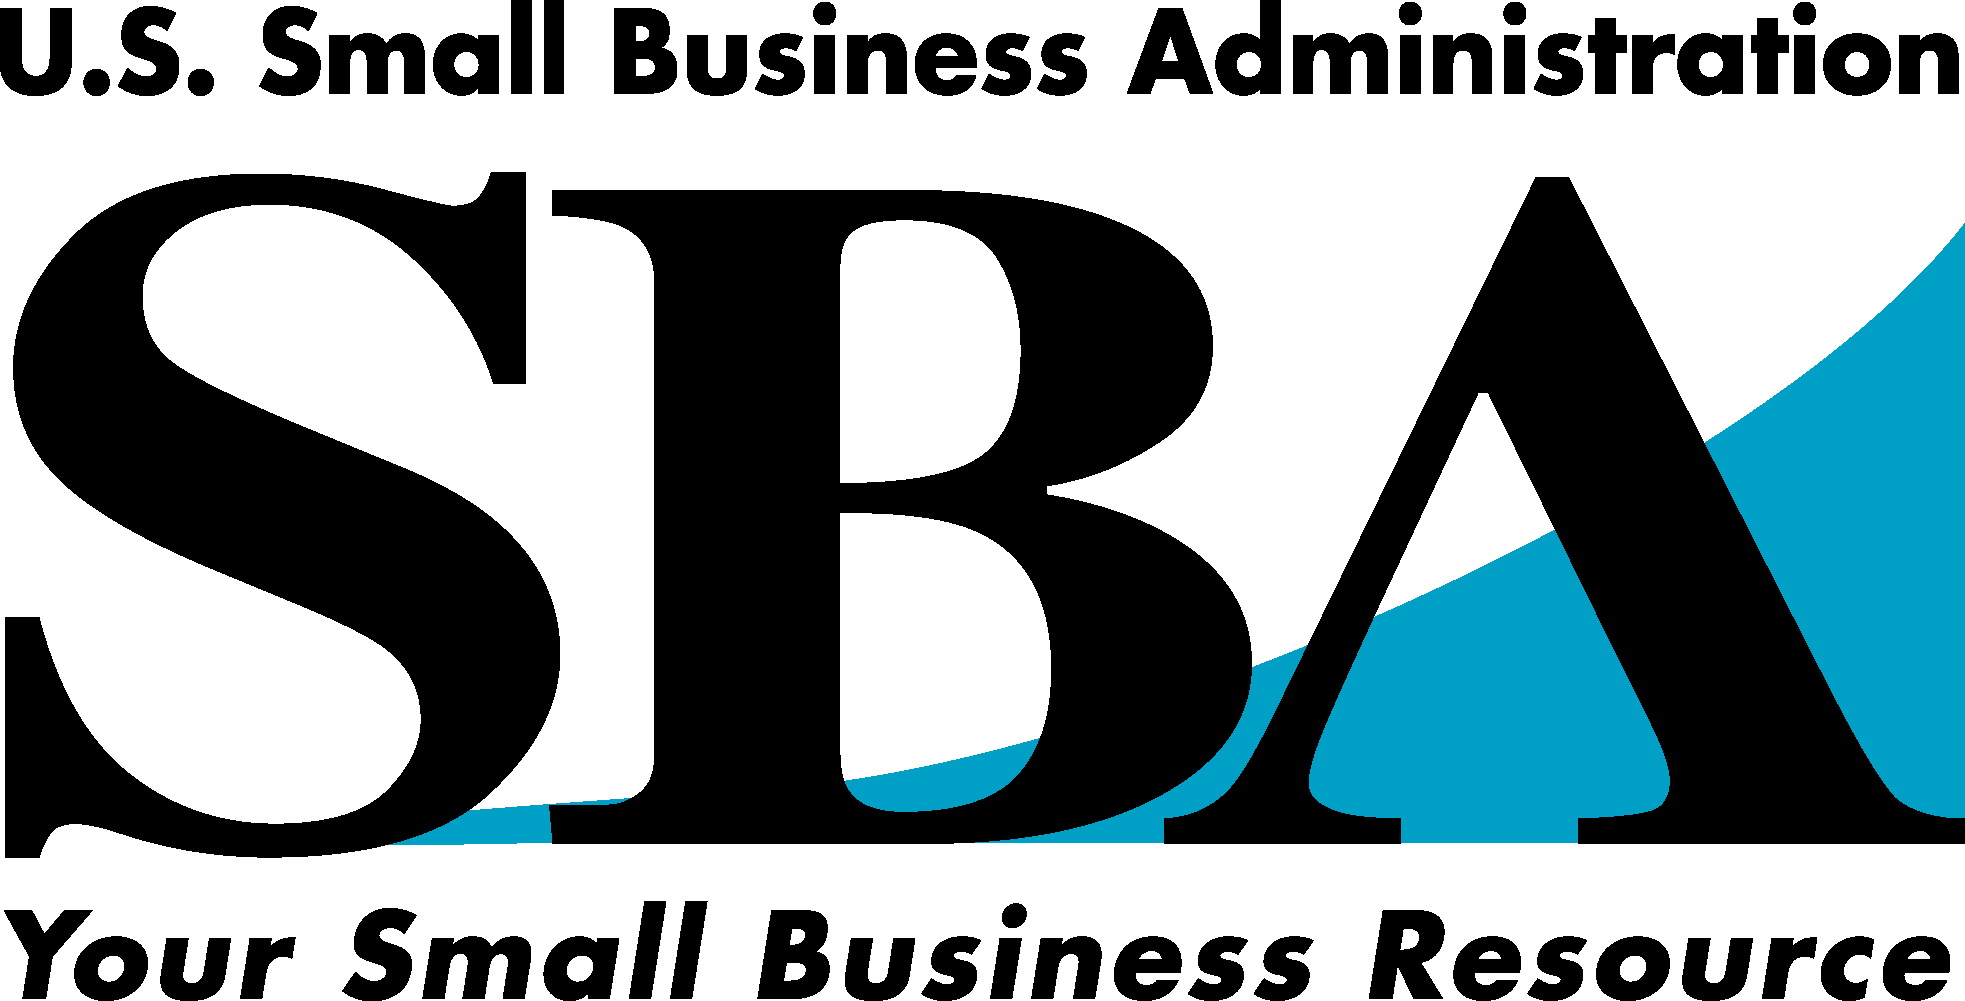 Click here to go to SBA website